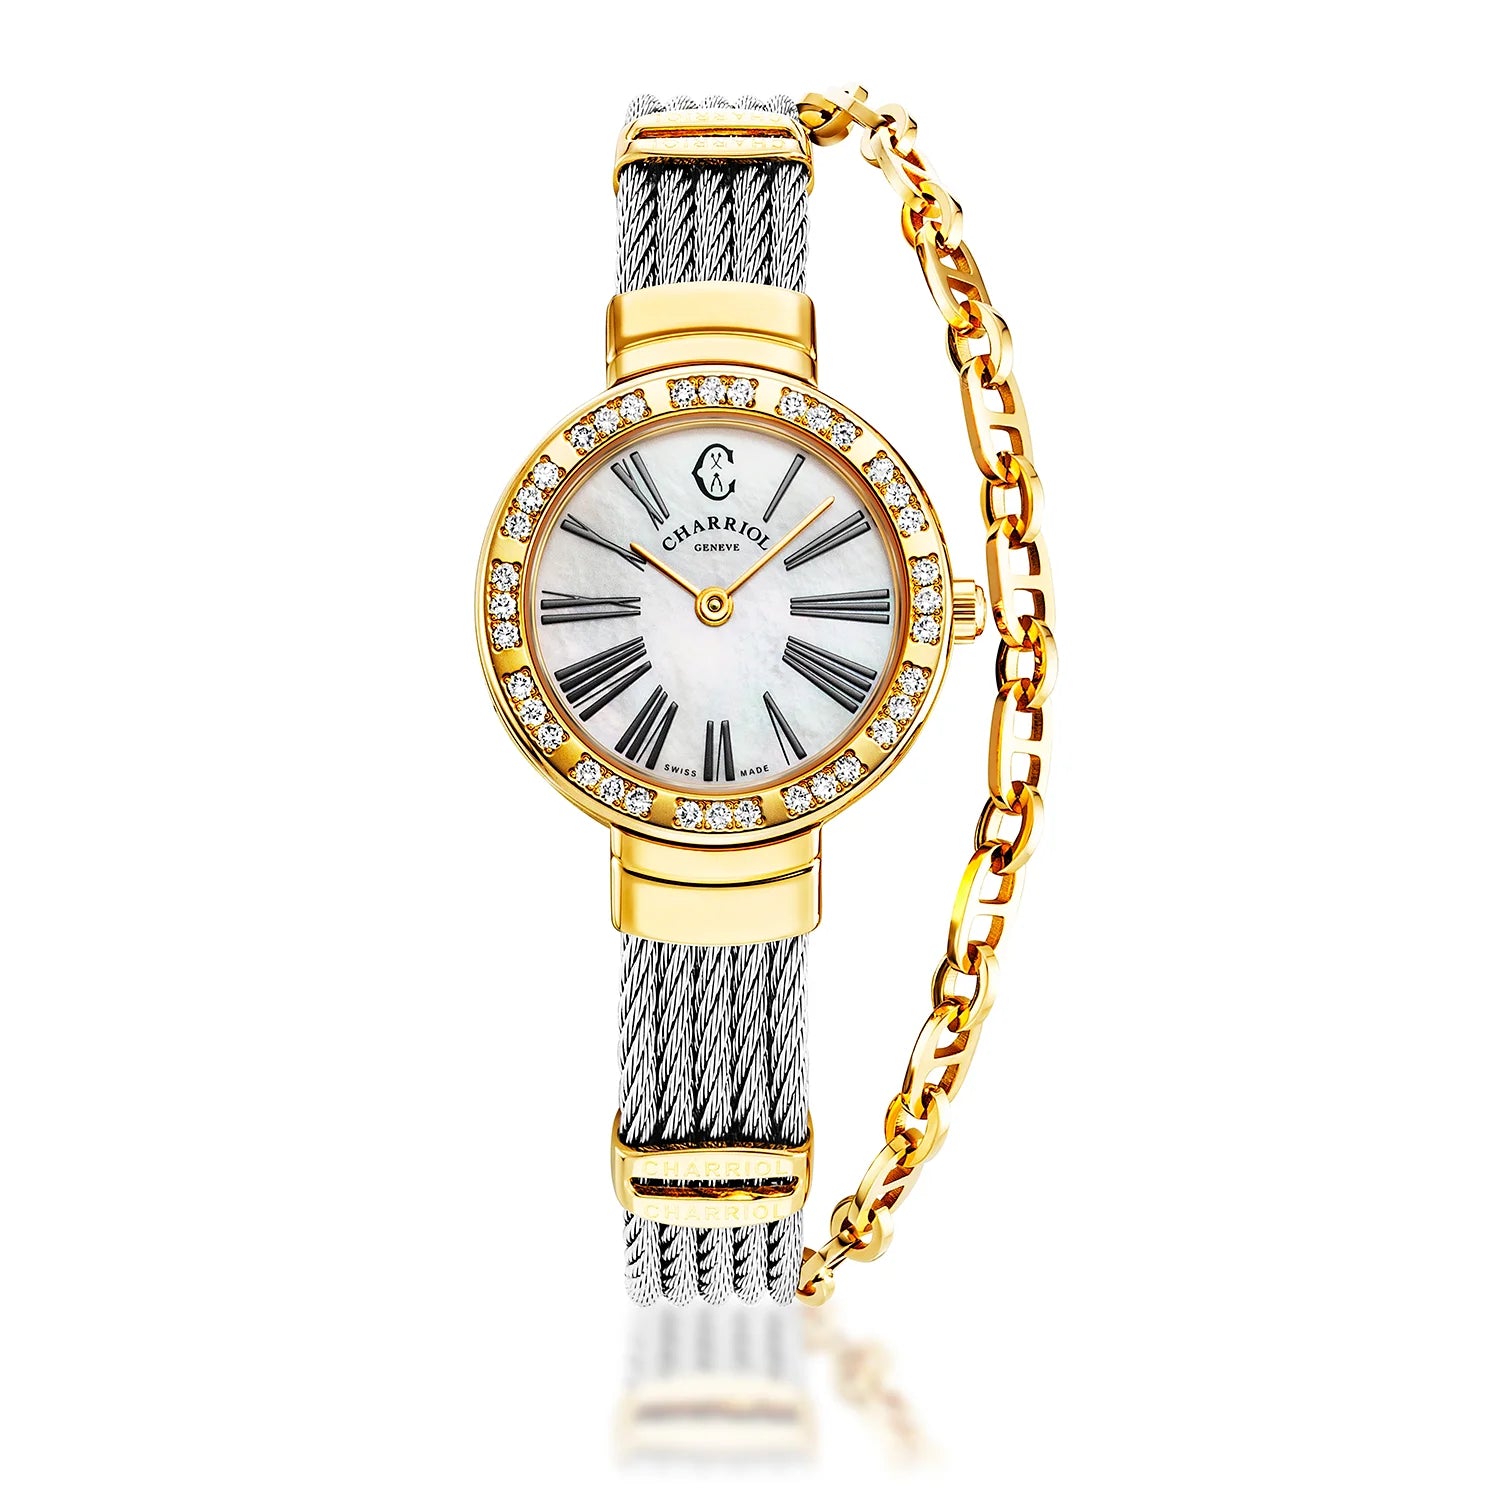 ST TROPEZ, 25MM, QUARTZ CALIBRE, MOTHER-OF-PEARL DIAL, YELLOW GOLD PVD WITH 36 DIAMONDS BEZEL, STEEL CABLE BRACELET - Charriol Geneve -  Watch